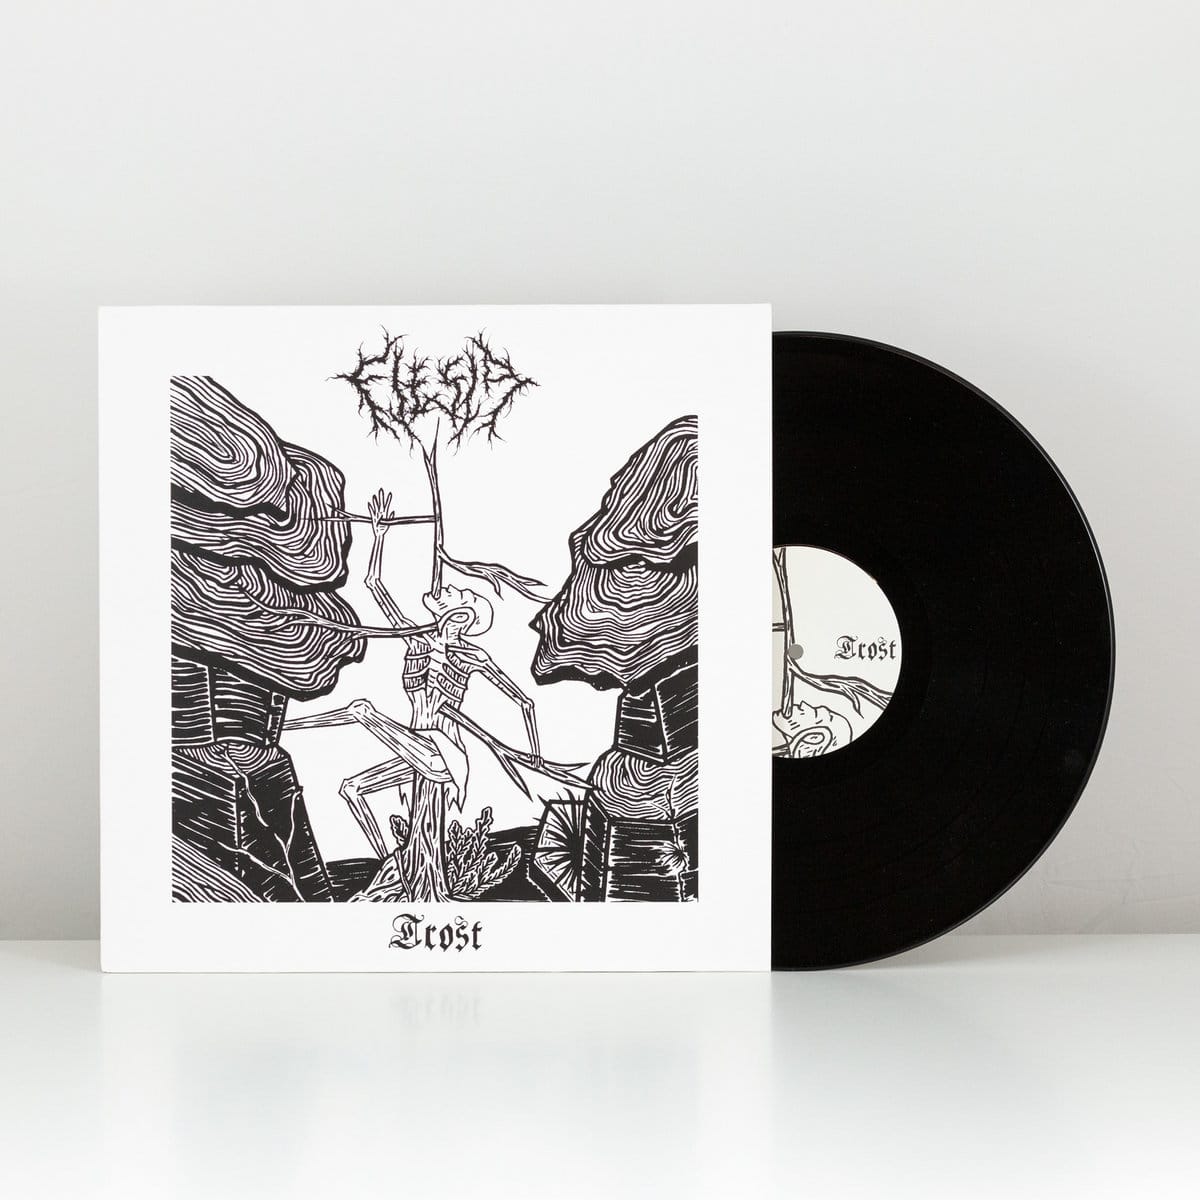 Flesia - Trost LP (Manyiax) Under the mighty roar of fatally melodic and gruellingly dissonant black metal, the Leipzig trio Flesia sees the darkness of the world. The fitting soundtrack is provided by their debut album Trost, on which exactly that is not to be found.